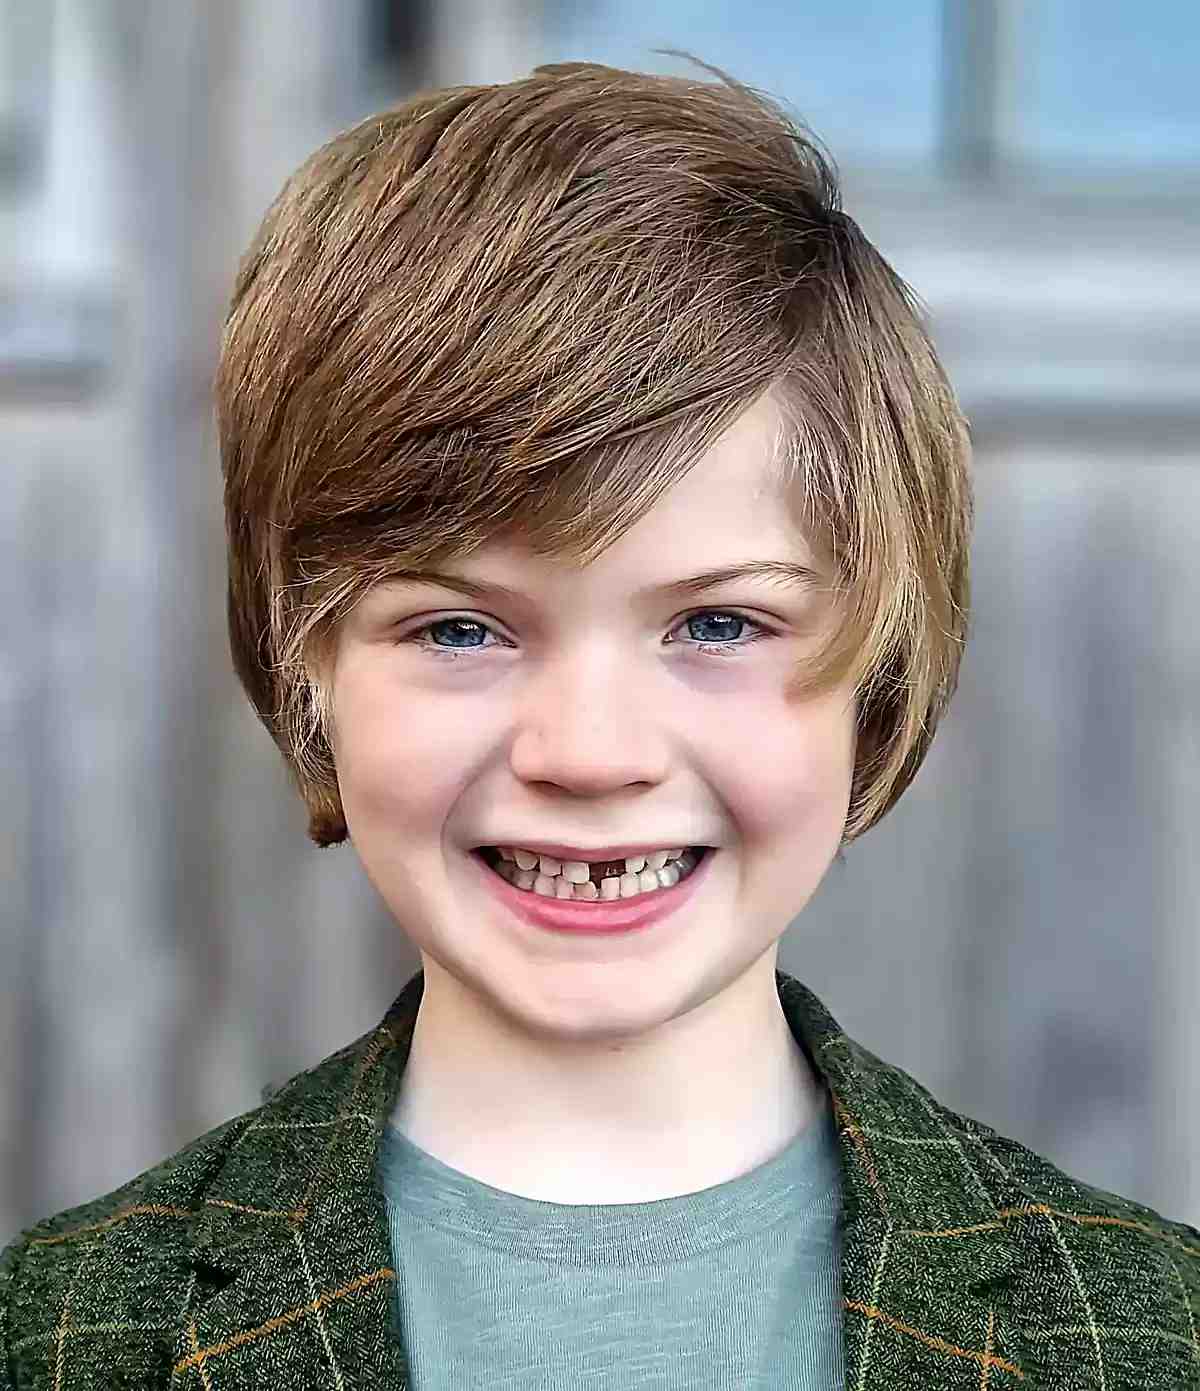 Medium Cut with Side-Swept Bangs for Little Boys